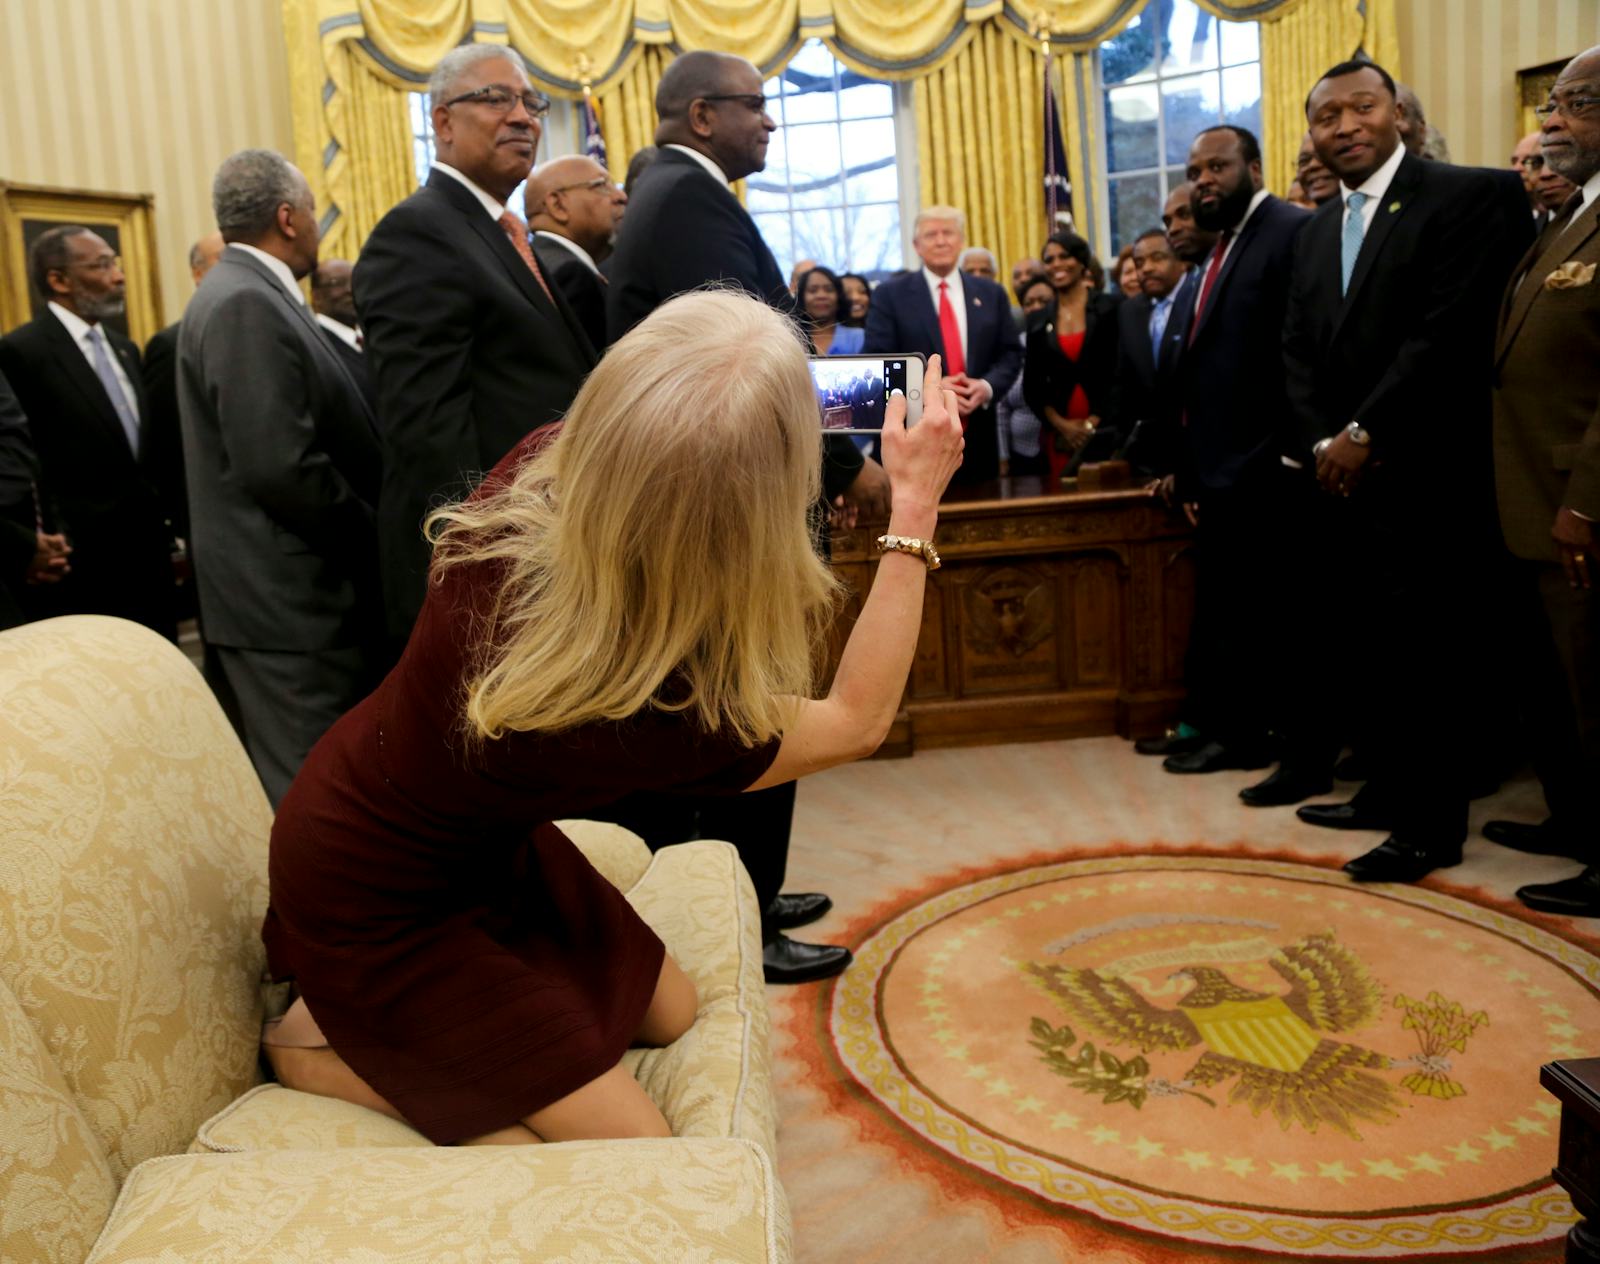 Kellyanne Conway Says The Oval Office Couch Photo Is Anything But A Big Deal